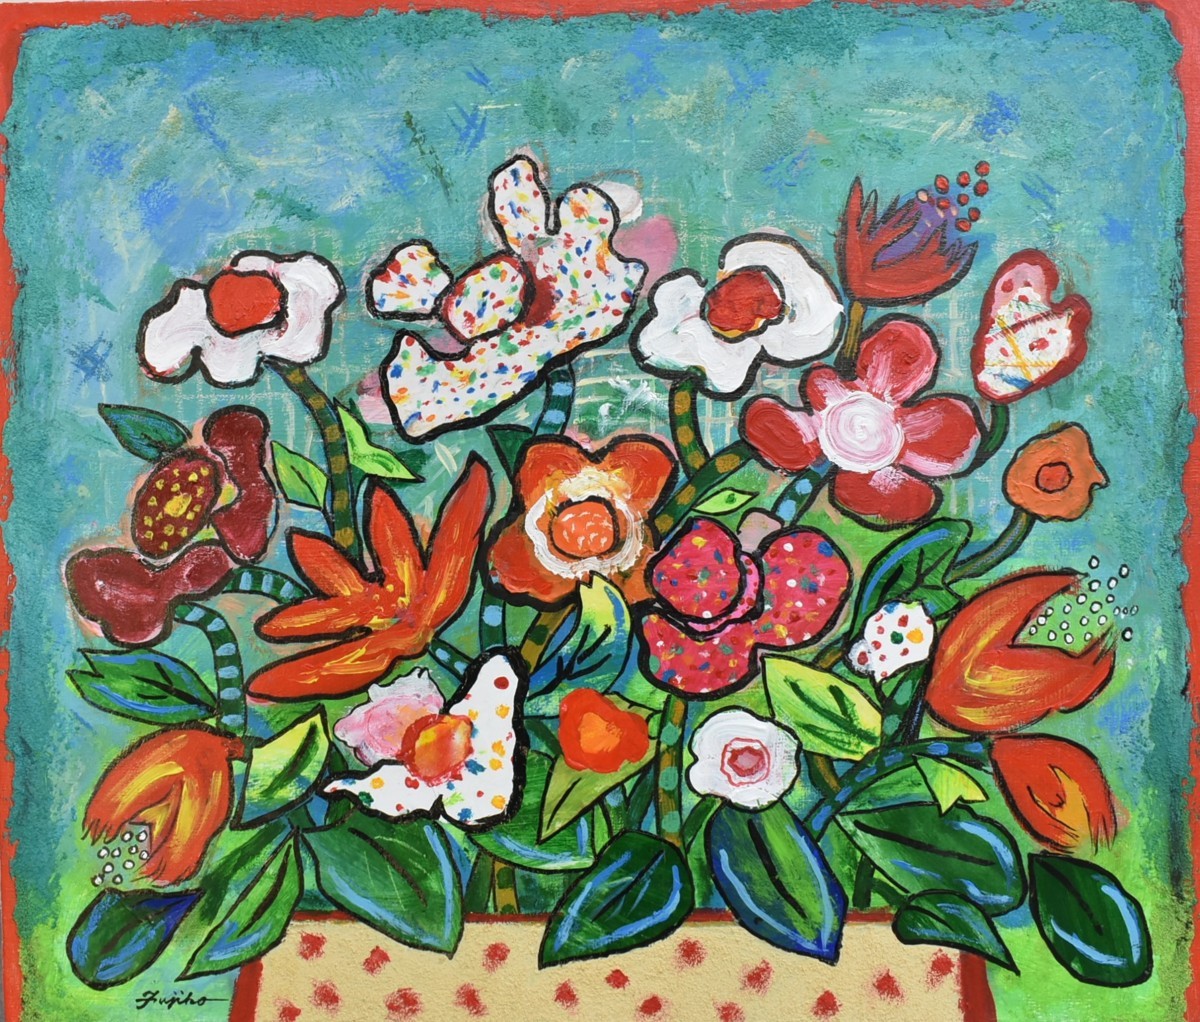 New oil painting by popular artist Fujiko Shirai, No. 10 Flowers of Banquet [Masami Gallery], Painting, Oil painting, Still life